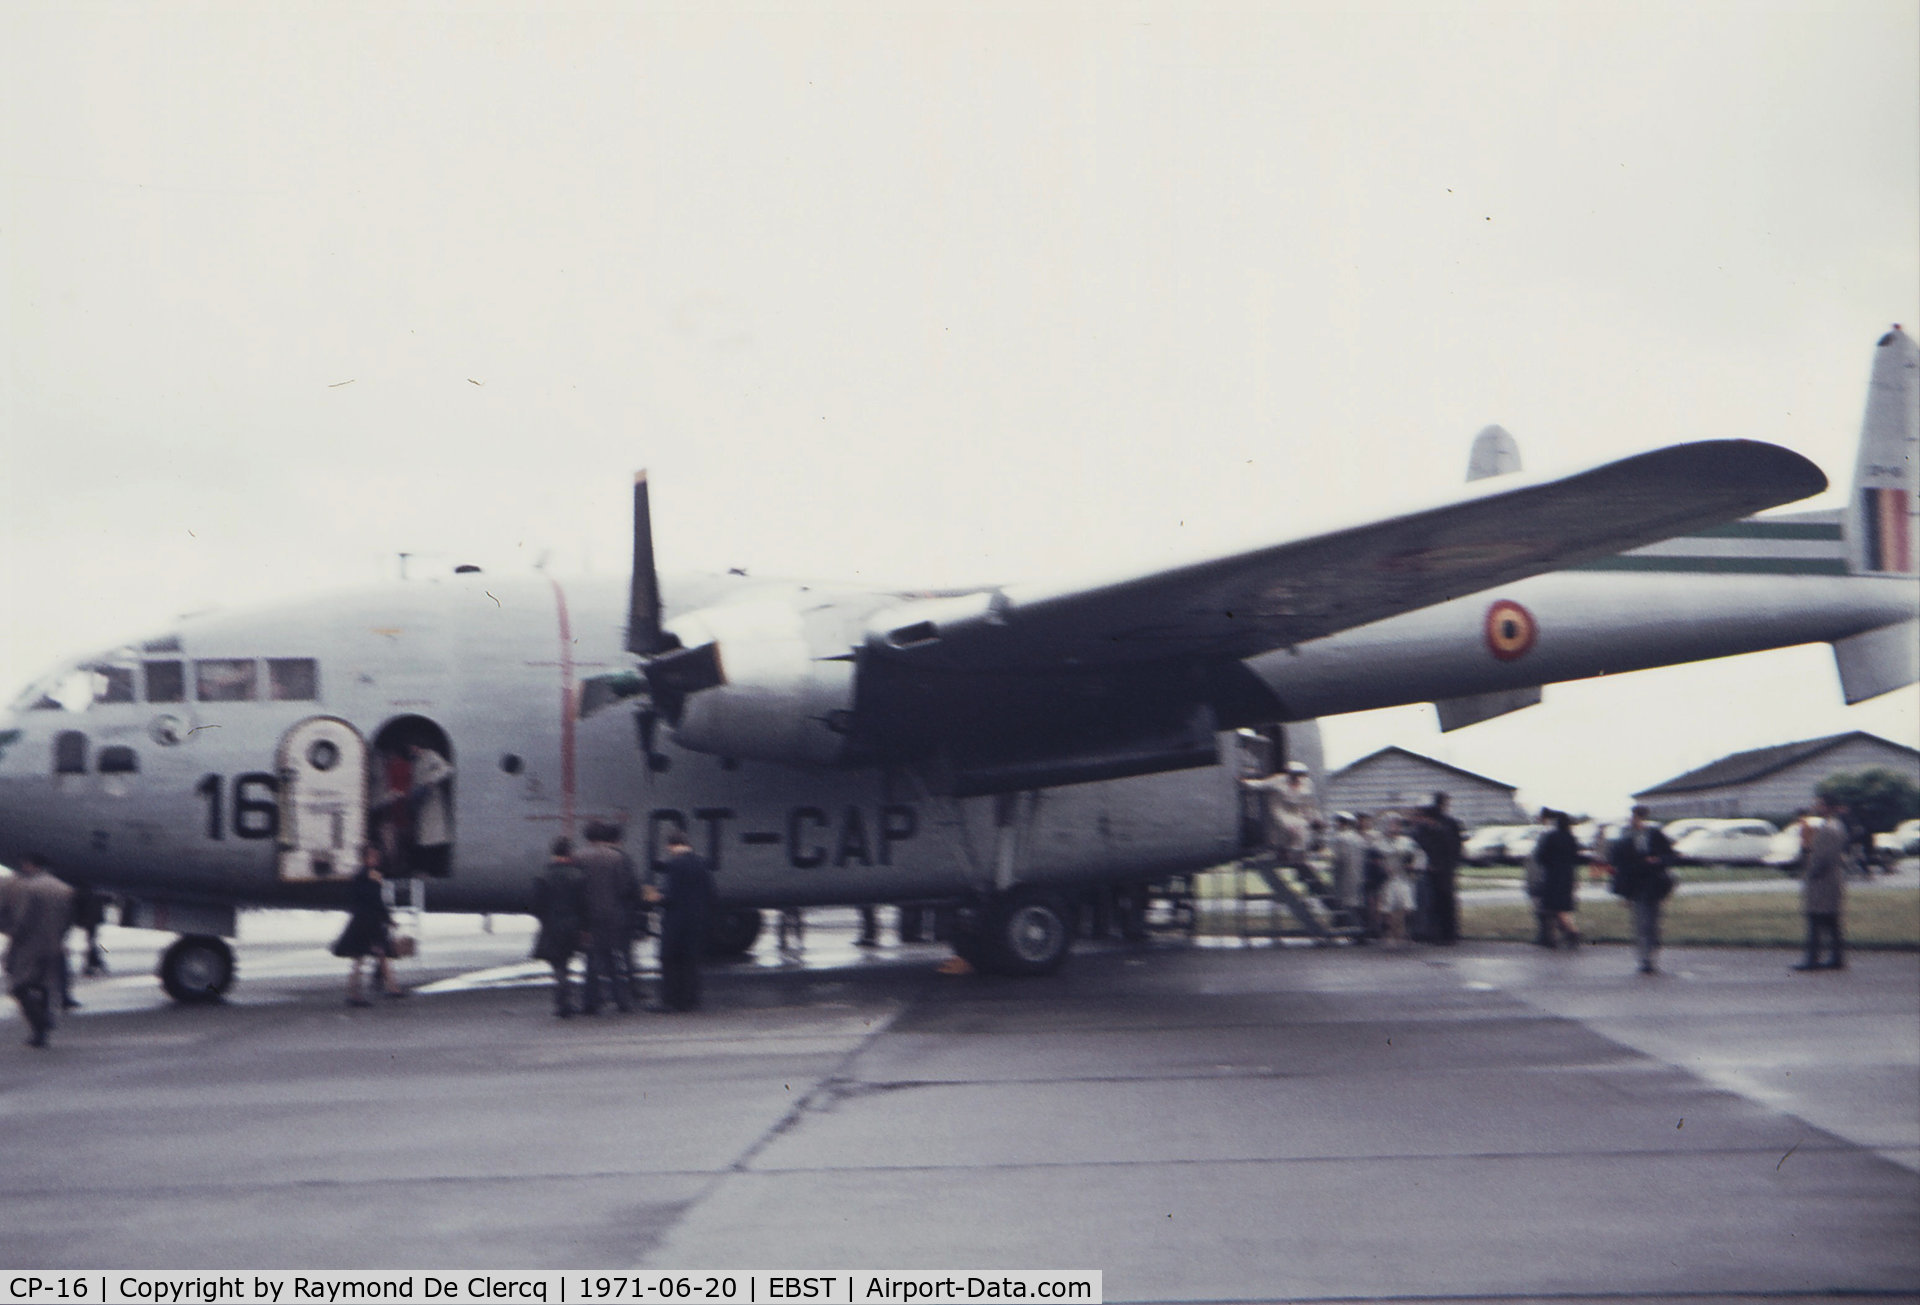 CP-16, 1951 Fairchild C-119G Flying Boxcar C/N 10696, At BAF meeting Brustem in 1971. CP-16 was ex USAF 51-2707 C-119F,  Later converted to C-119G and ended service in 1975.
Not so good photo,sorry.